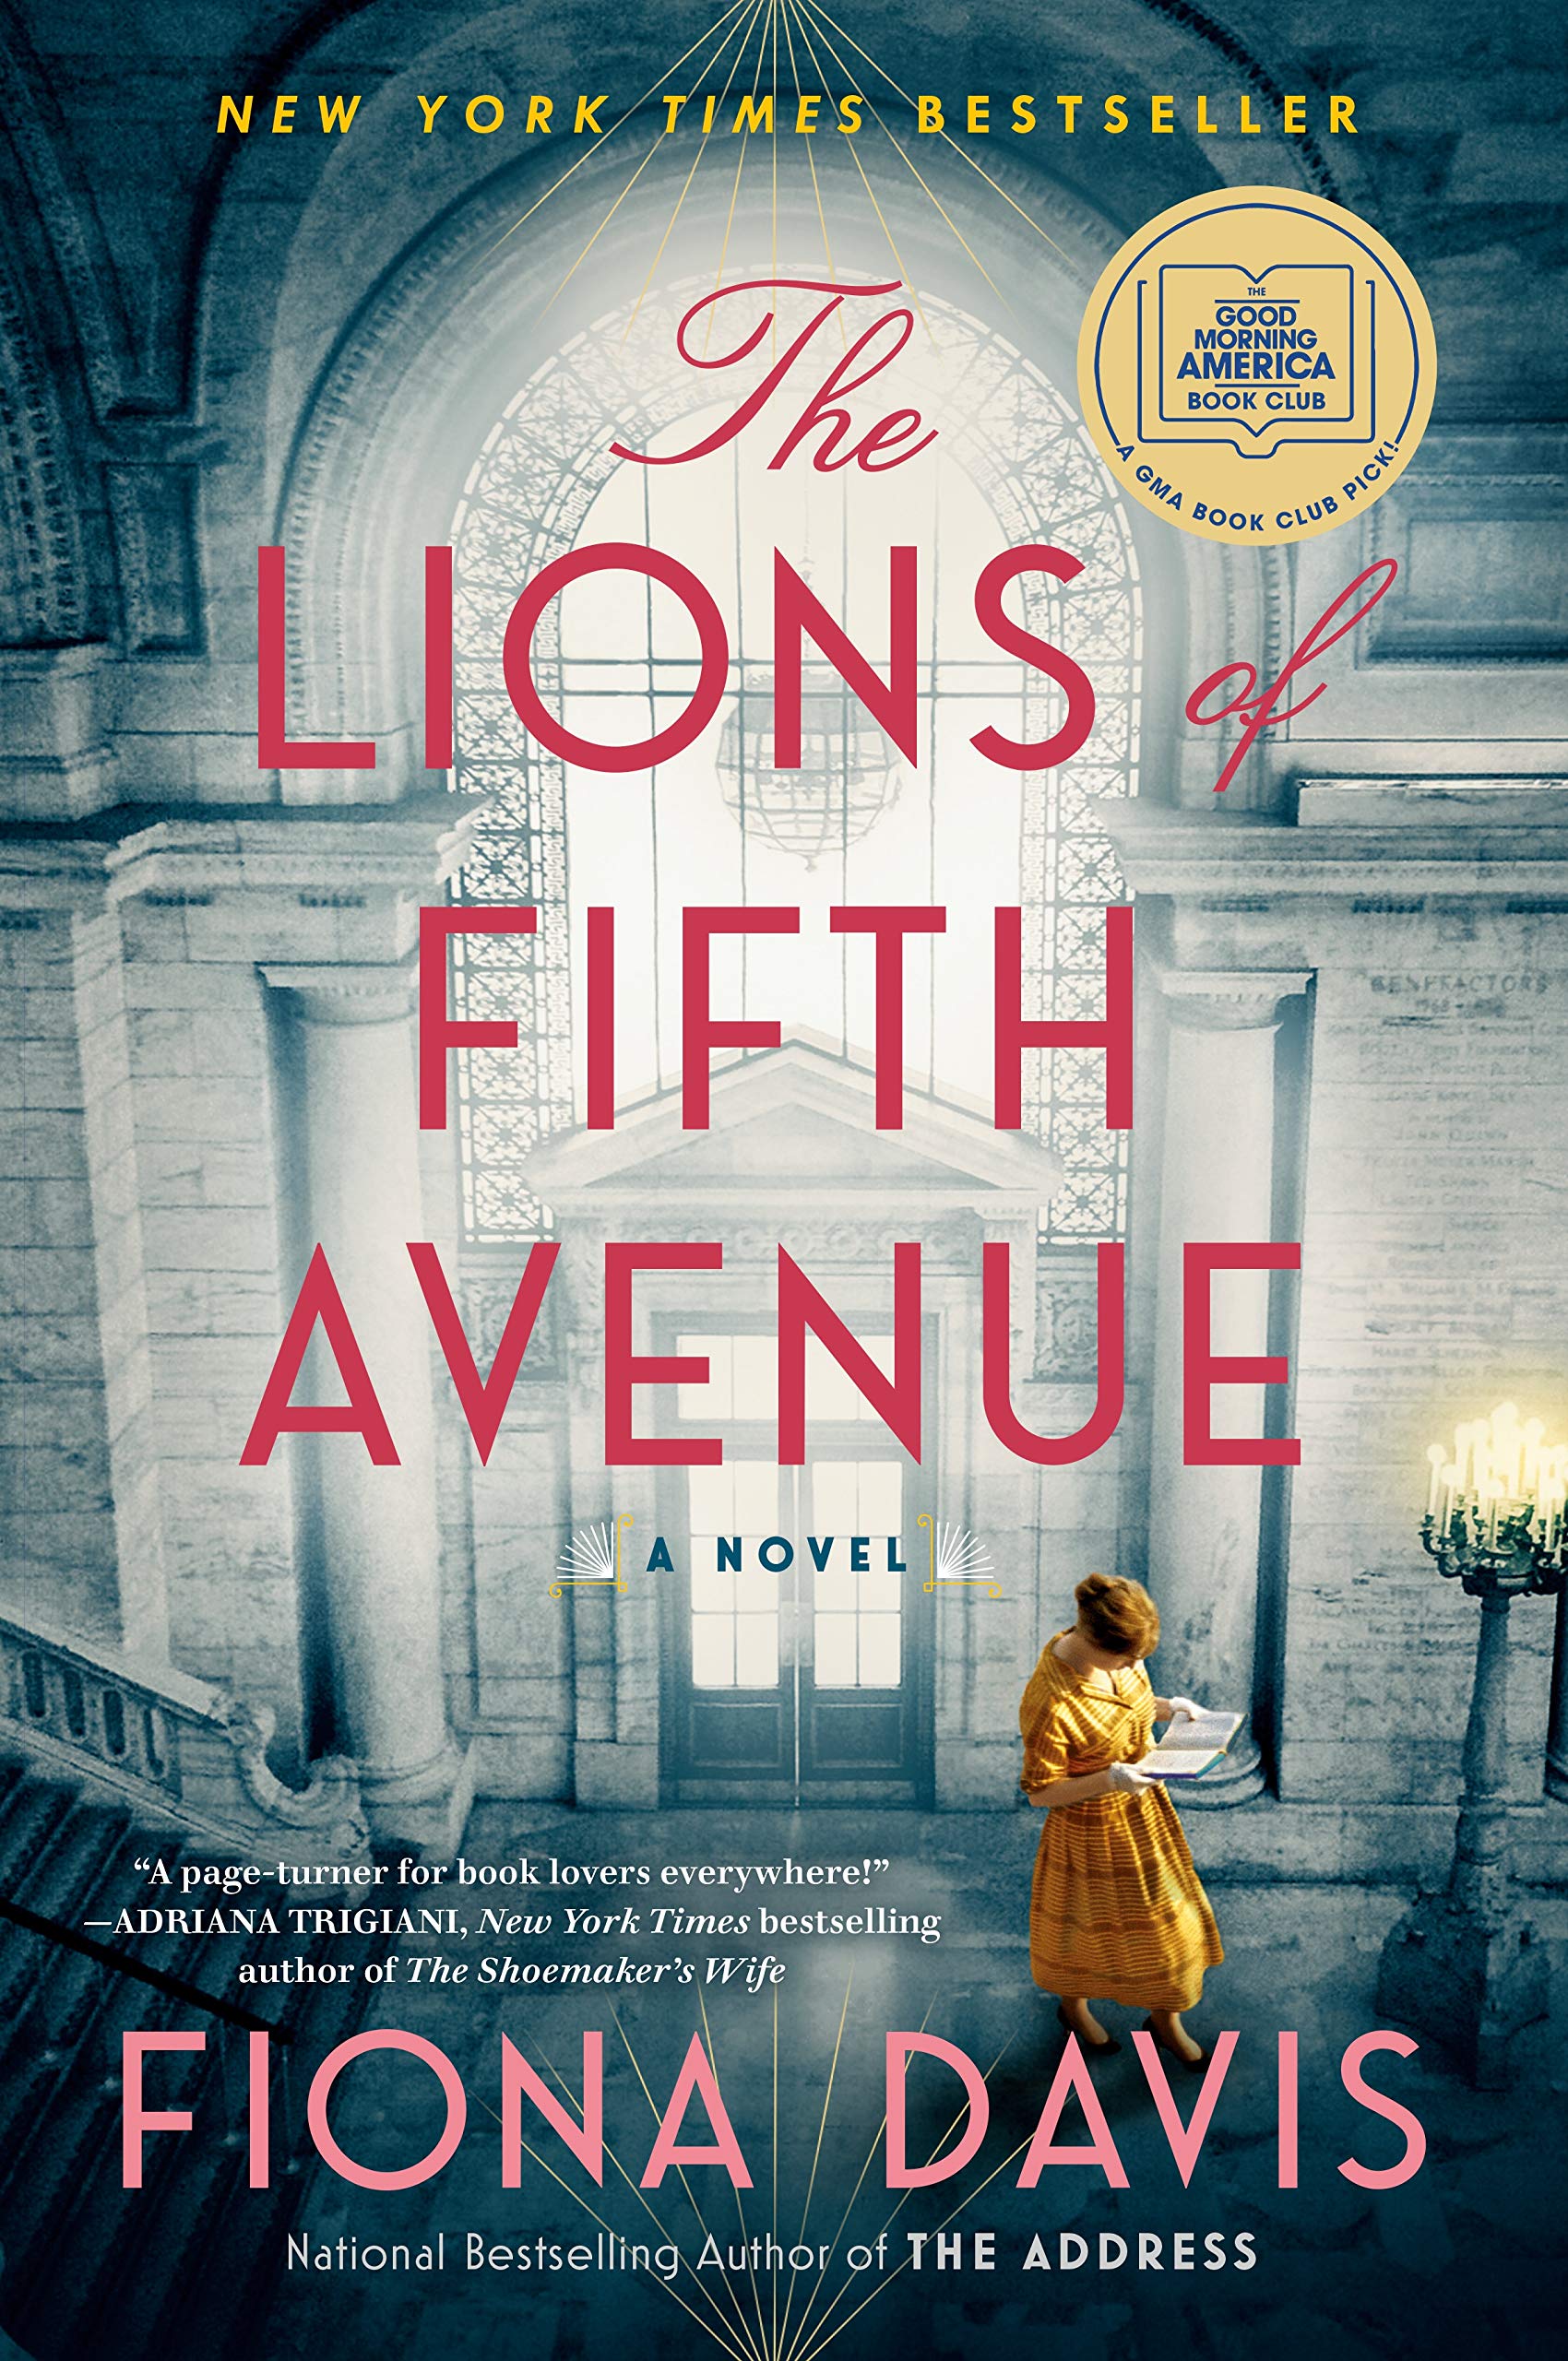 Lions Of Fifth Avenue